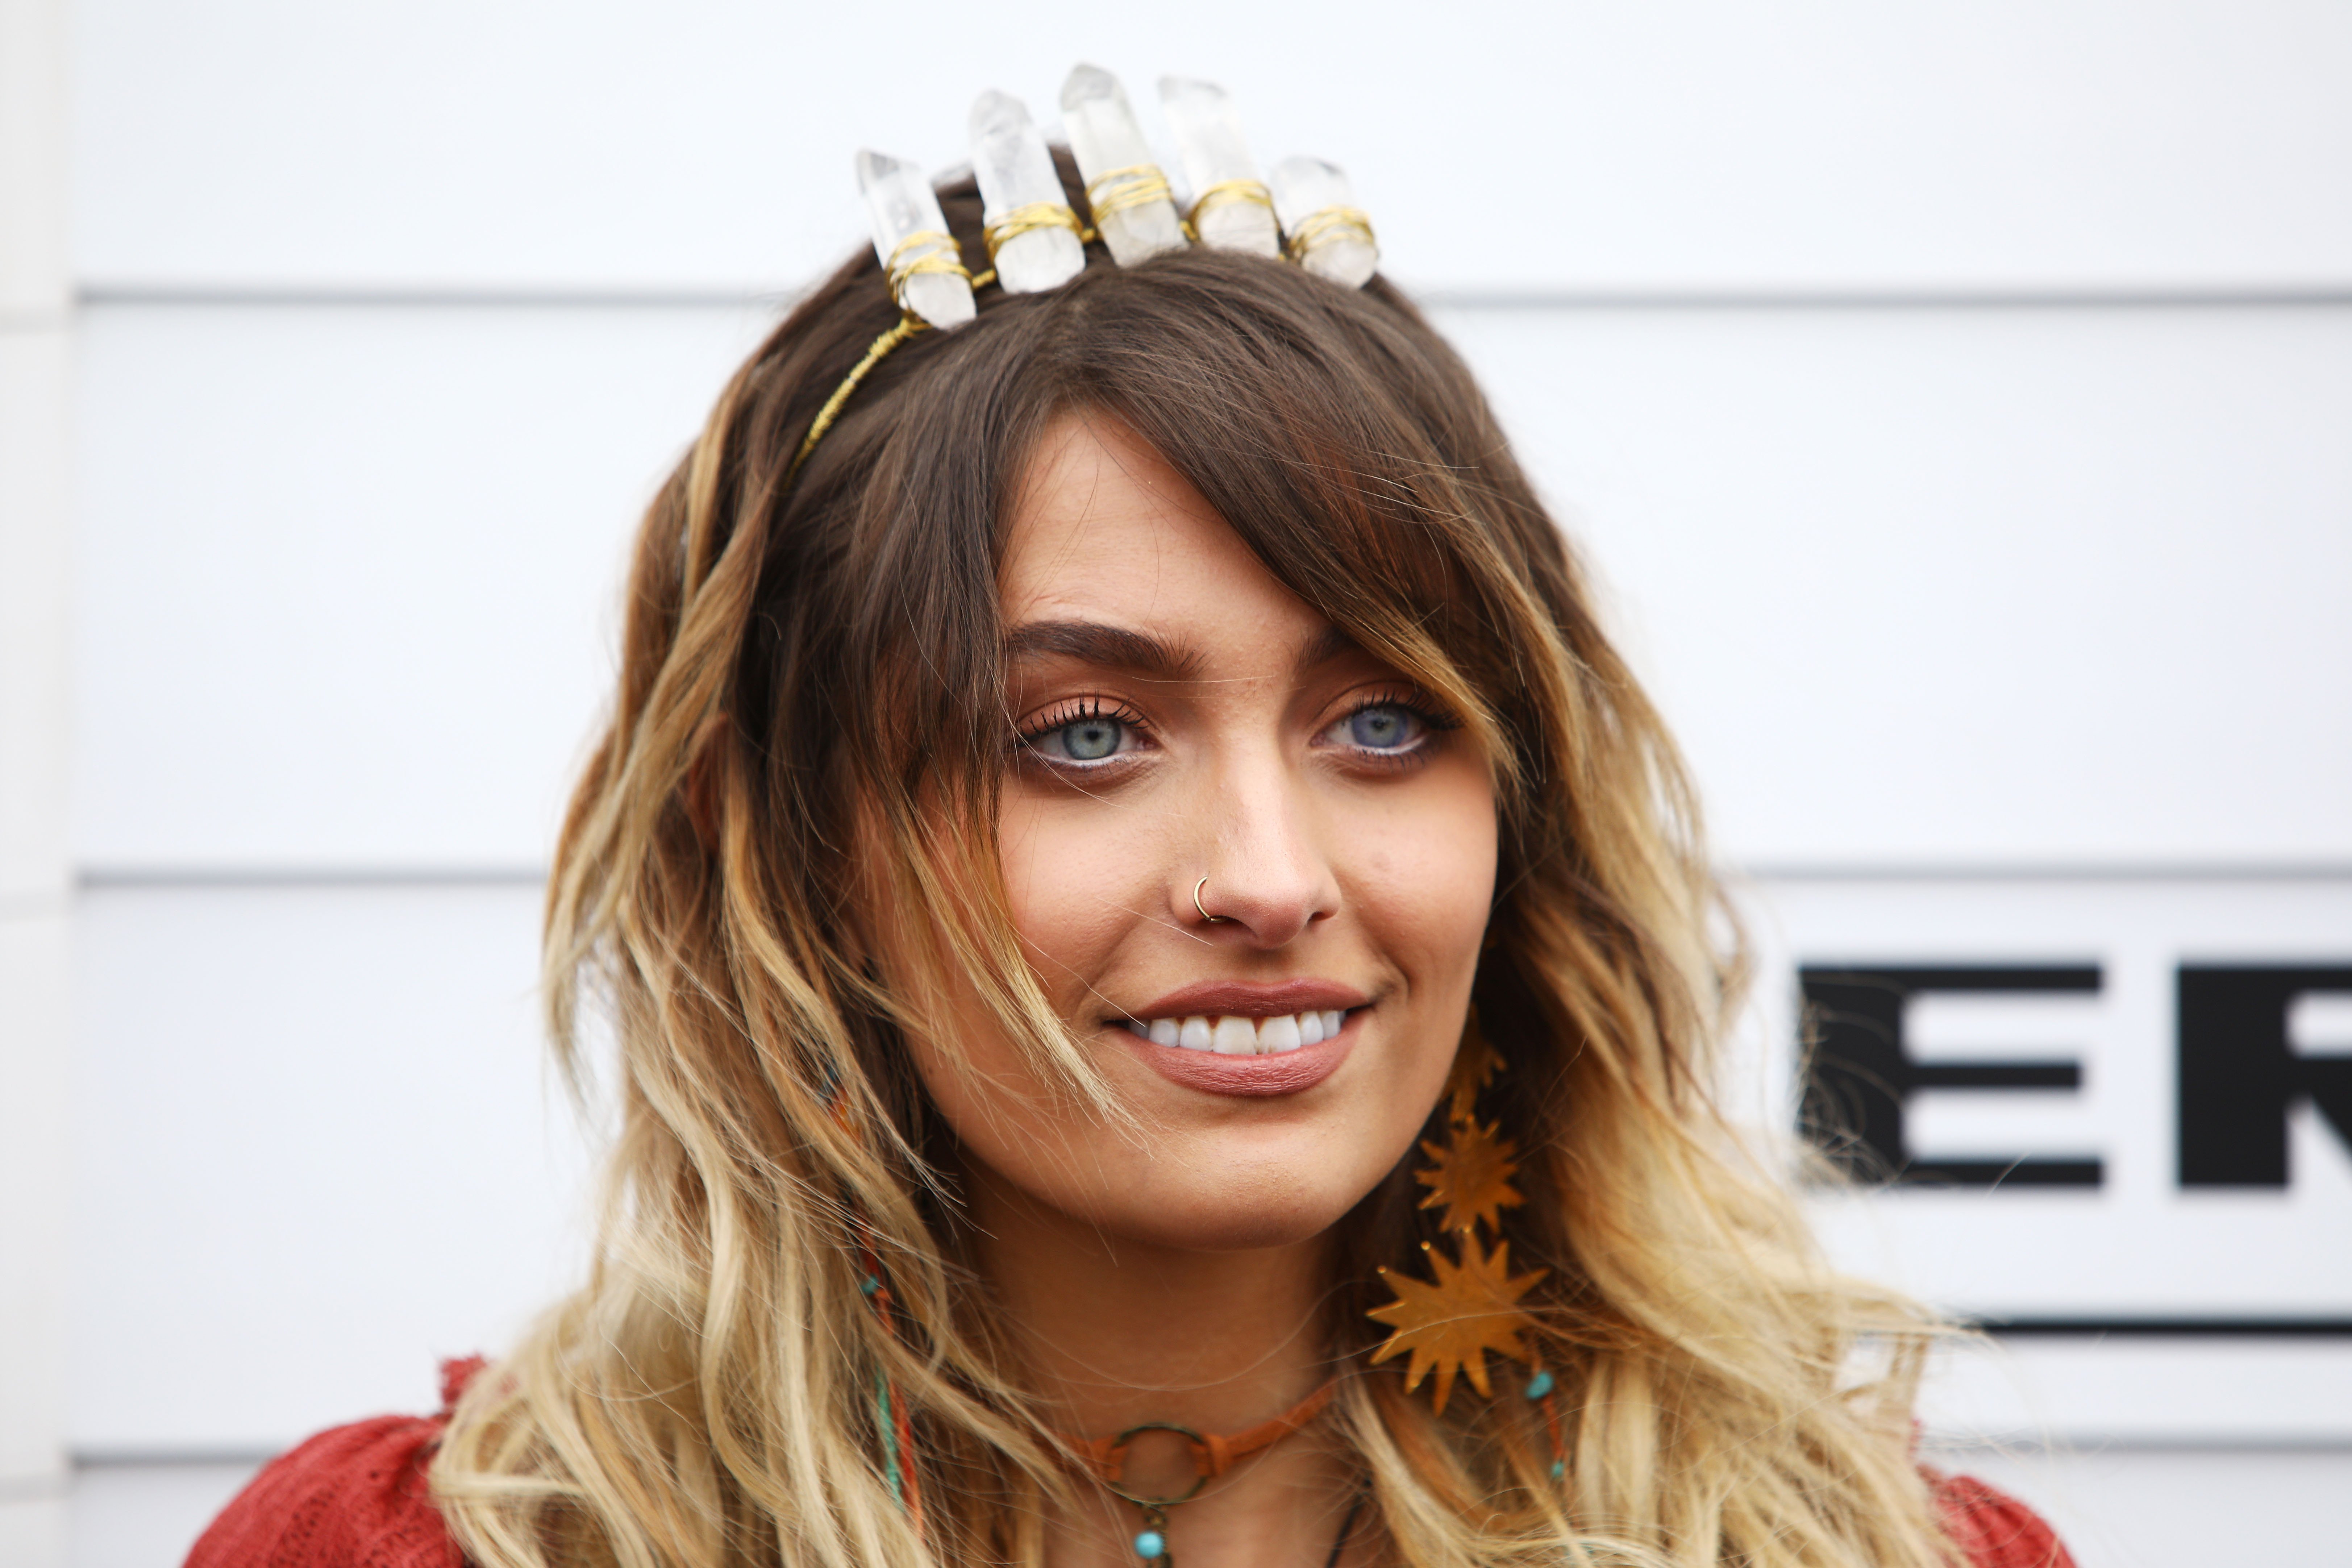 Paris Jackson poses at the Myer Marquee on Emirates Melbourne Cup Day at Flemington Racecourse on November 7, 2017, in Melbourne, Australia. | Source: Getty Images.